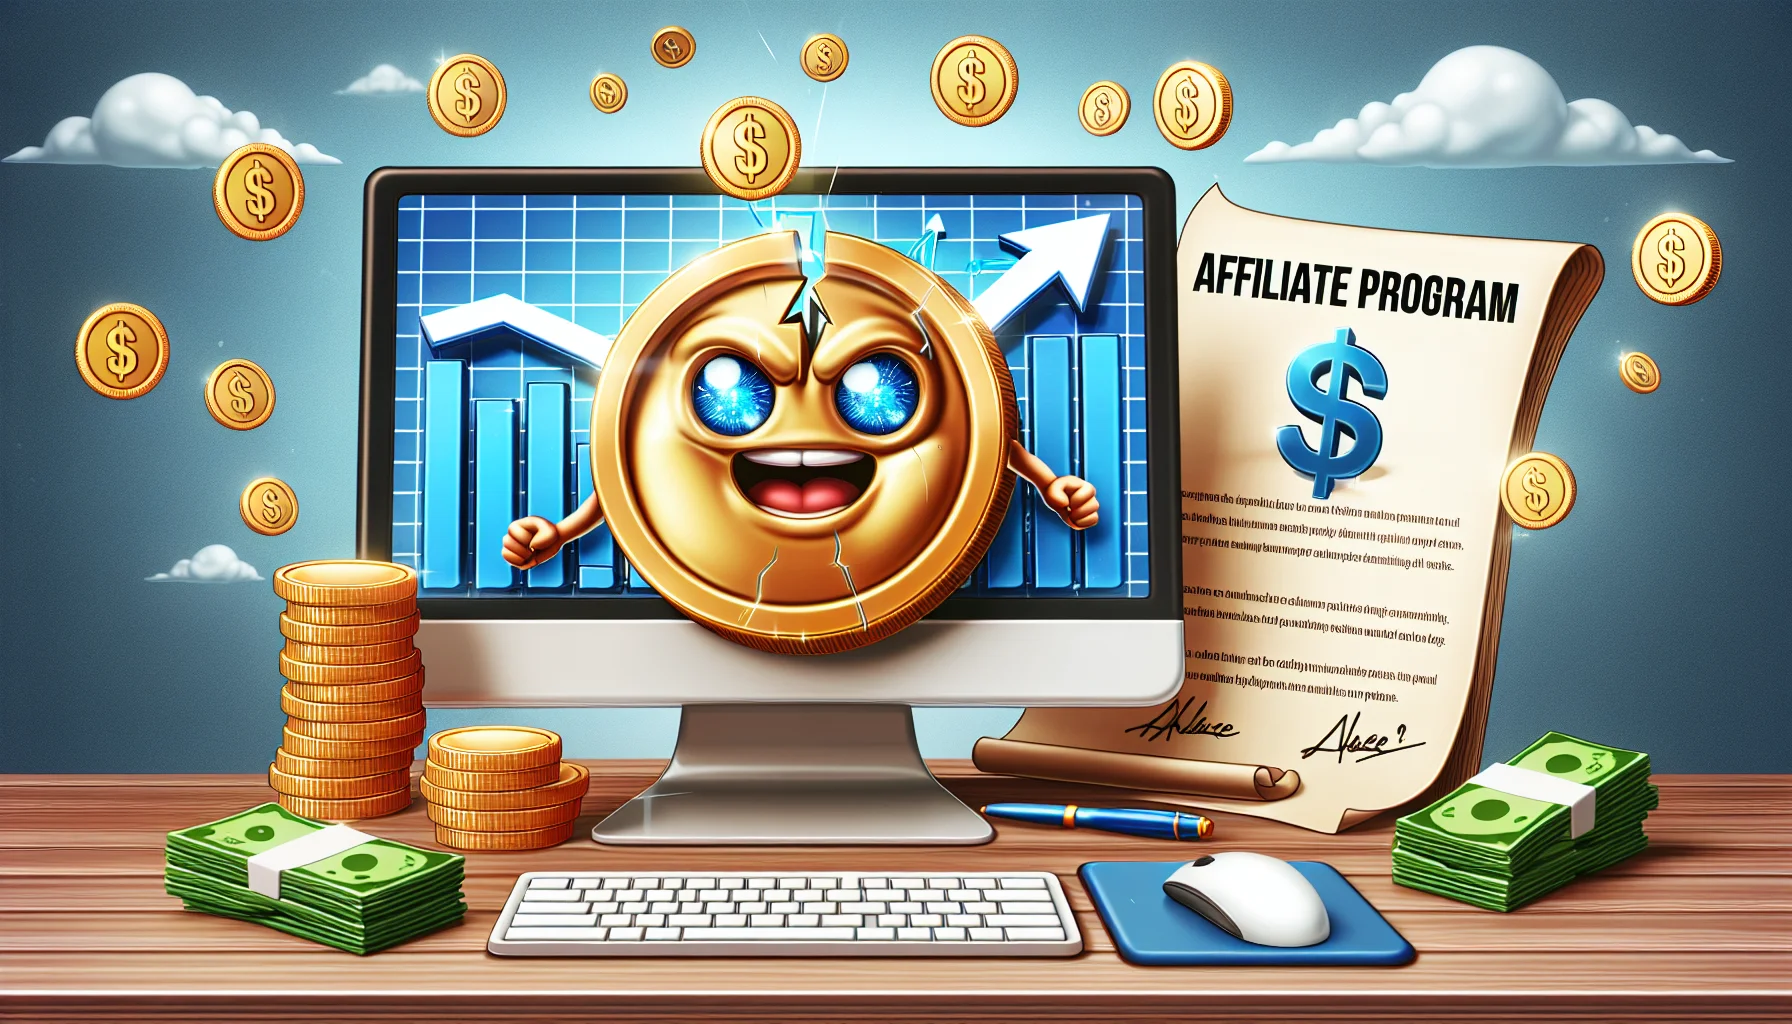 Create a comical and realistic scene related to online income generation, featuring the concept of an affiliate marketing program. The scene could show a computer screen displaying skyrocketing graphs to denote increased profits with a shiny coin icon, intermittently flashing in a catchy manner, symbolizing monetary earnings. Nearby, there can be a comically oversized contract with 'Affiliate Program' written on it, signifying the importance of legality in online money-making practices. All elements in the scenario should be visually appealing to show the enticing nature of the affiliate program.